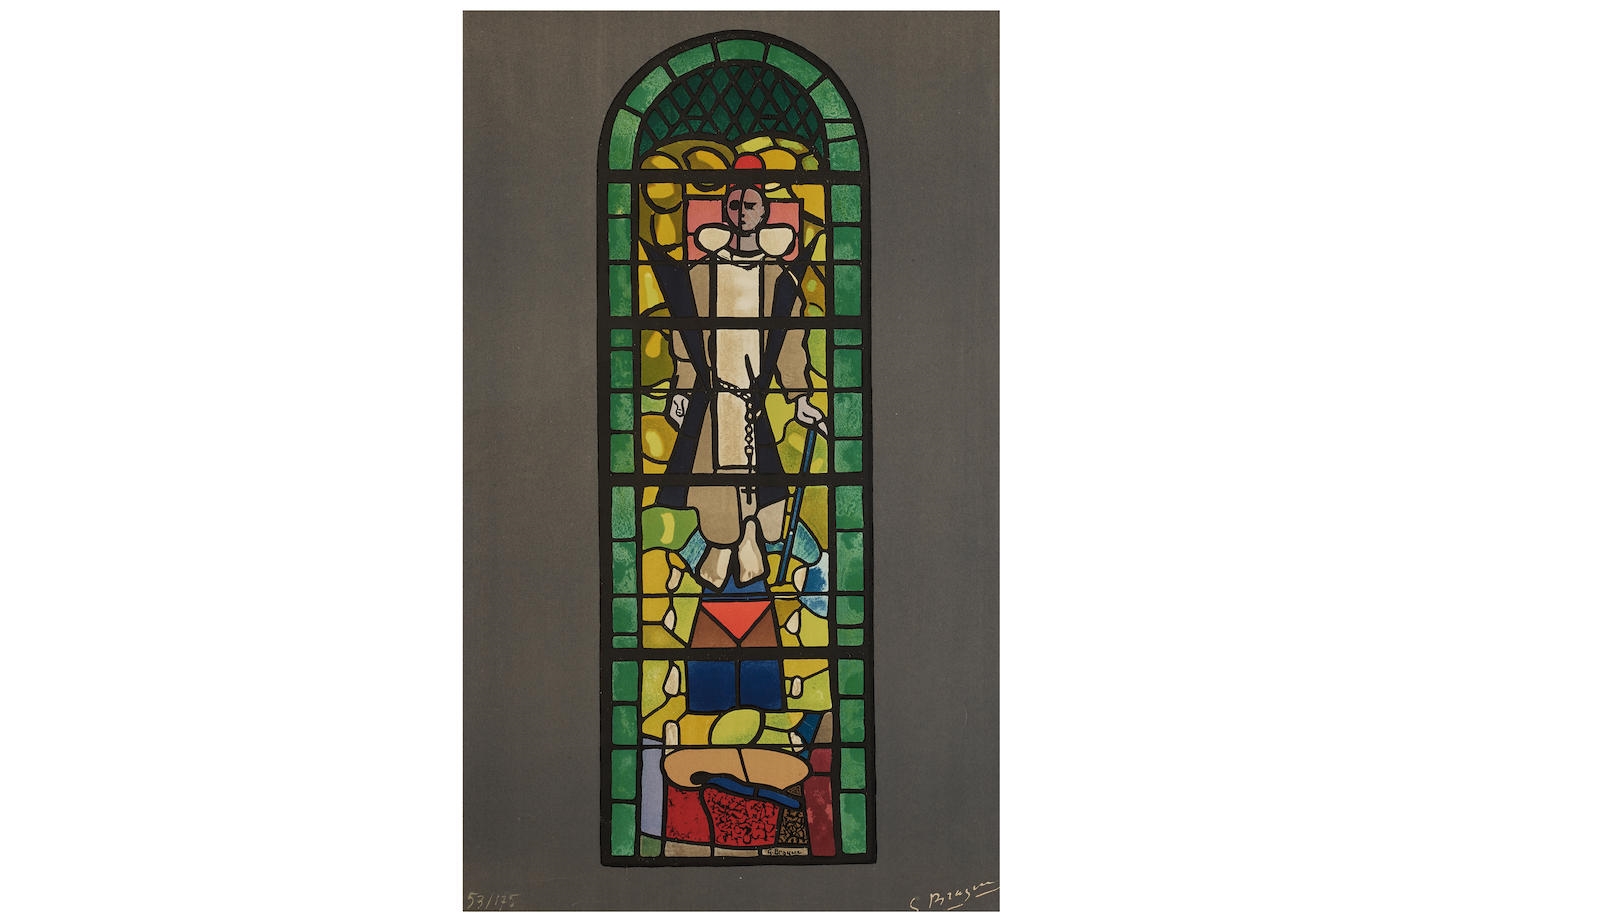 Stained Glass Window at Church of Saint Dominique, Varengeville by Georges Braque, 1960